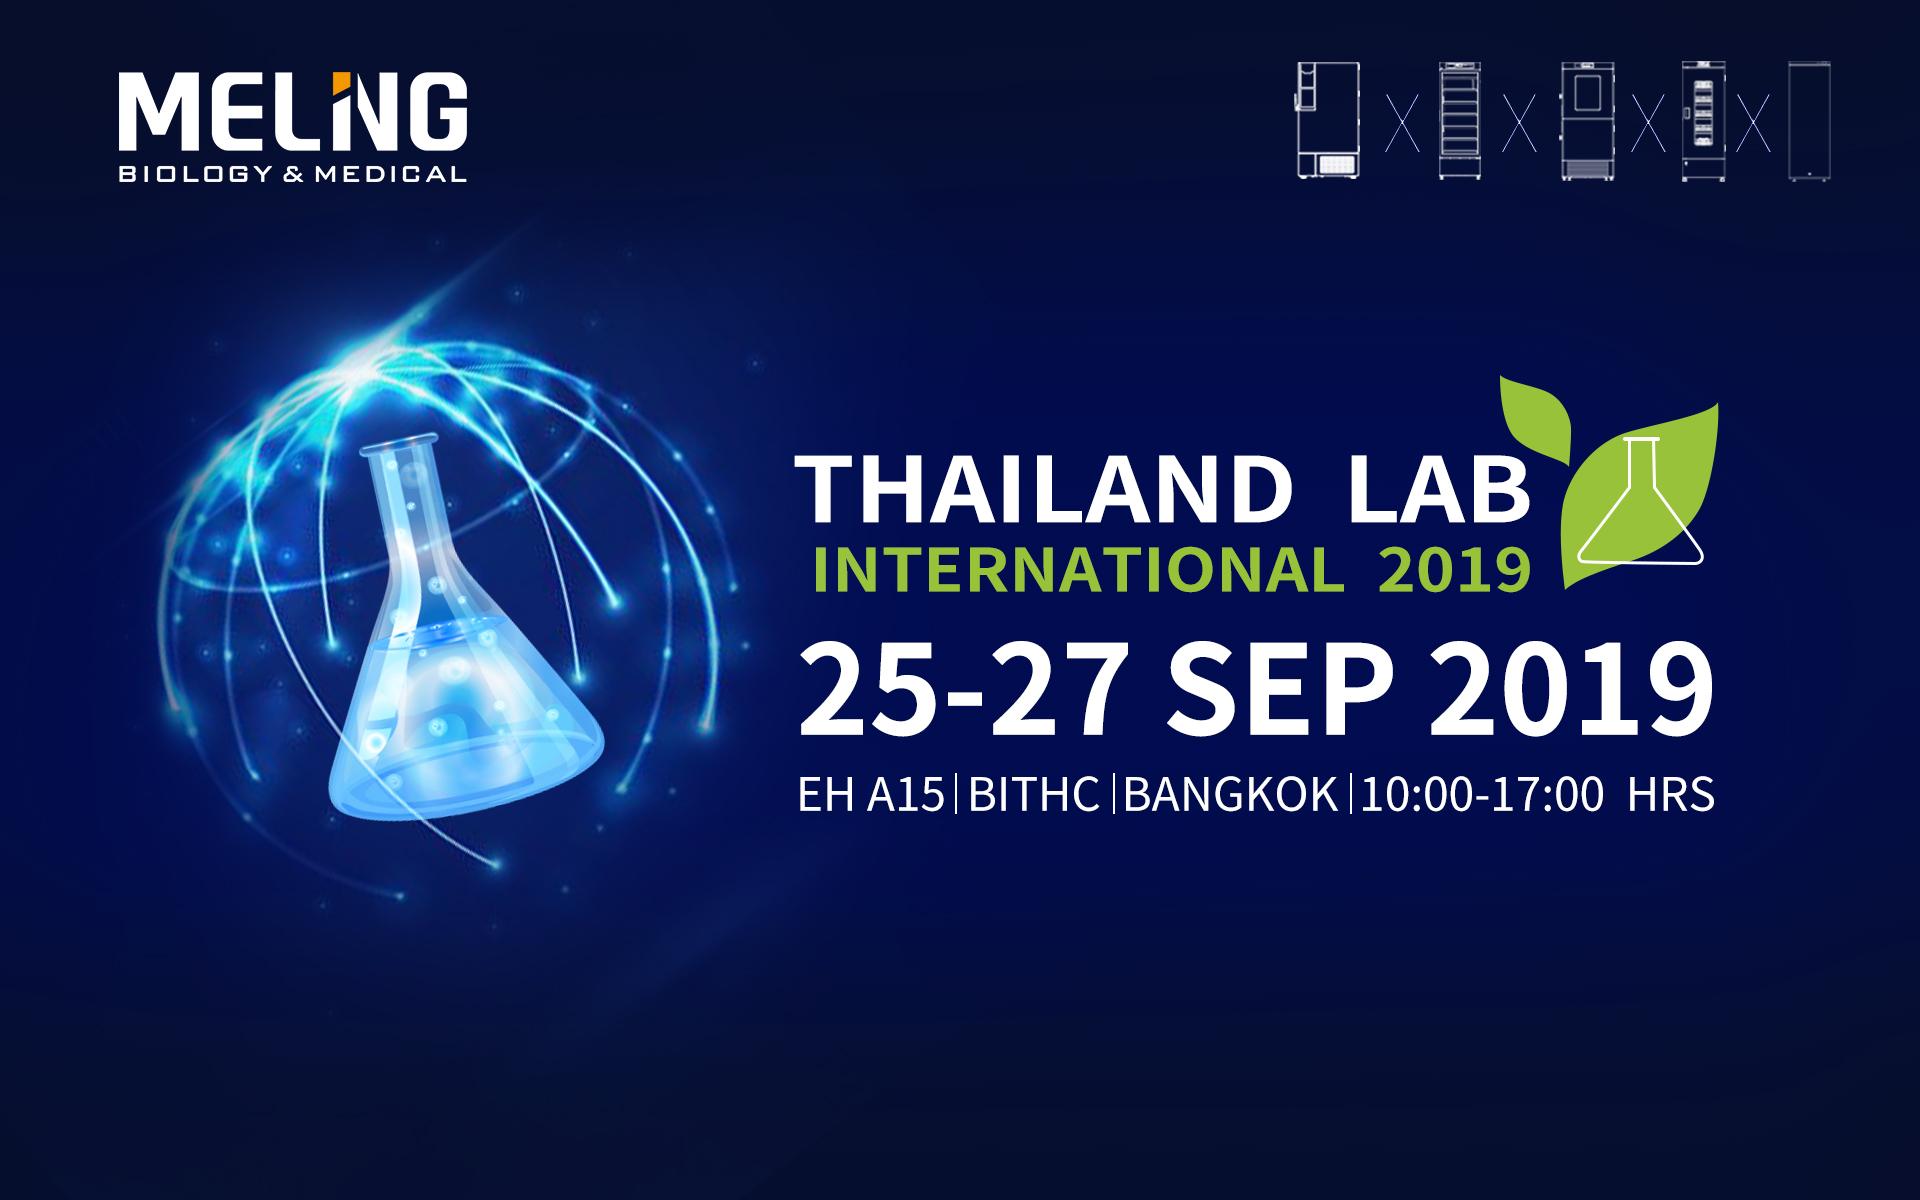 We sincerely invite you to attend the 2019 THAILAND LAB